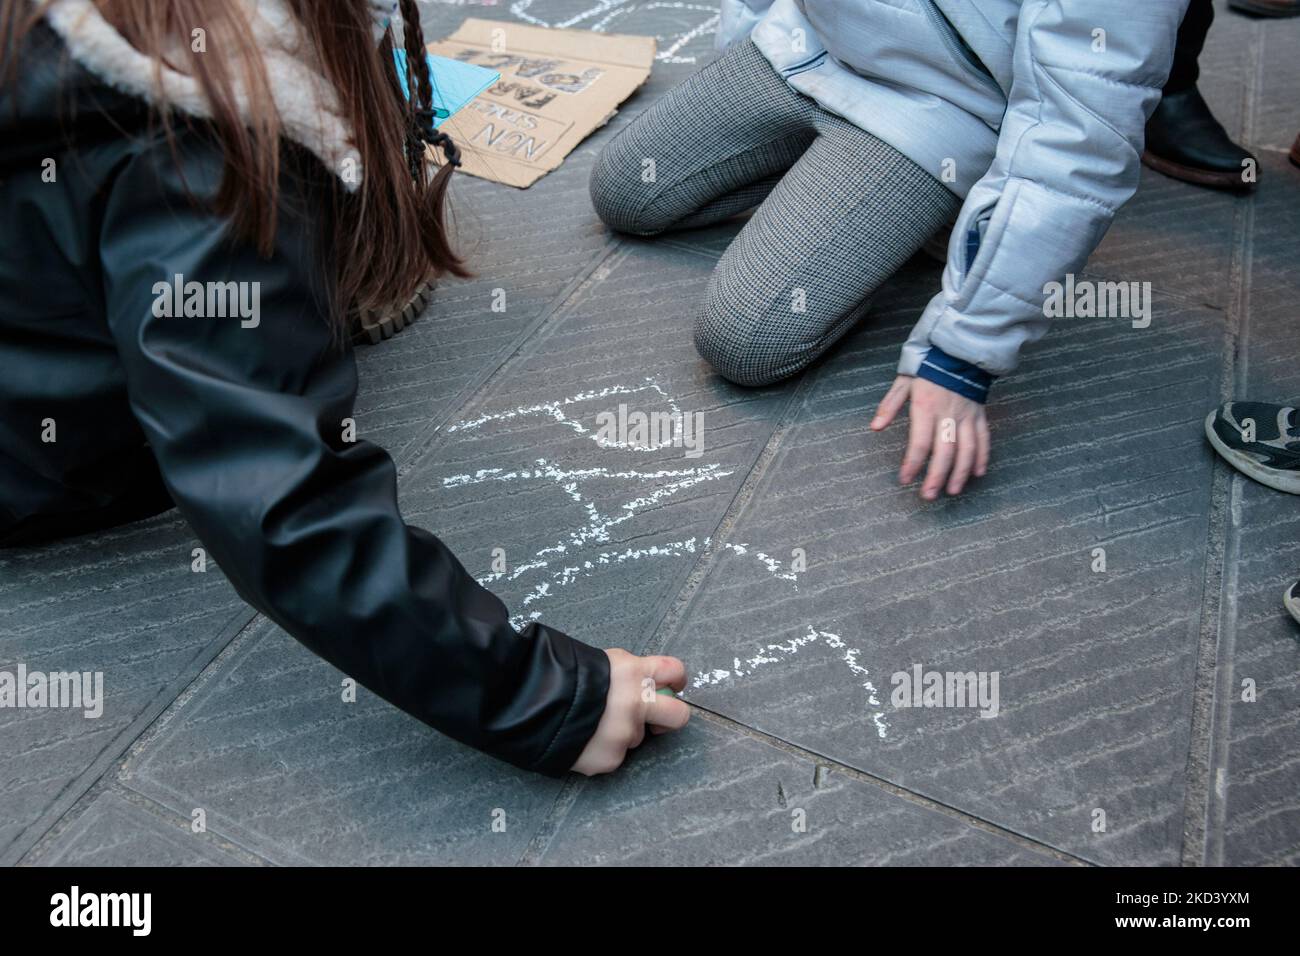 Children writing the word peace on the floor in Pisa, Italy, on February 28, 2022. As Russian troops invade Ukraine, antiwar protesters have been gathering around the world to demonstrate against Russian aggression. (Photo by Enrico Mattia Del Punta/NurPhoto) Stock Photo